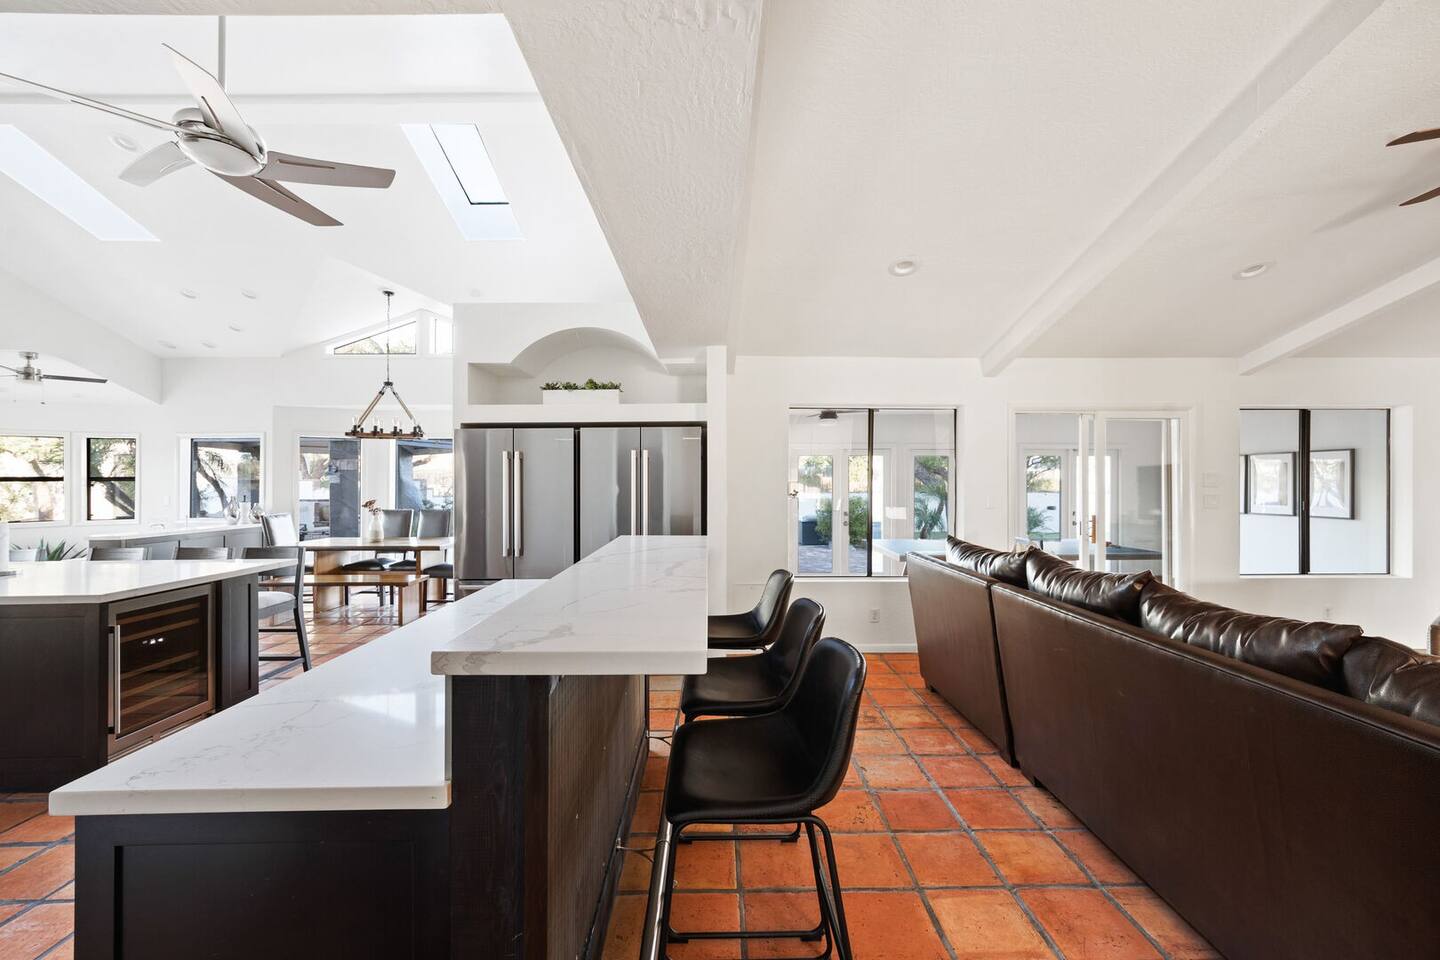 The kitchen boasts a large island with seating for three, perfect for gathering and enjoying meals together.